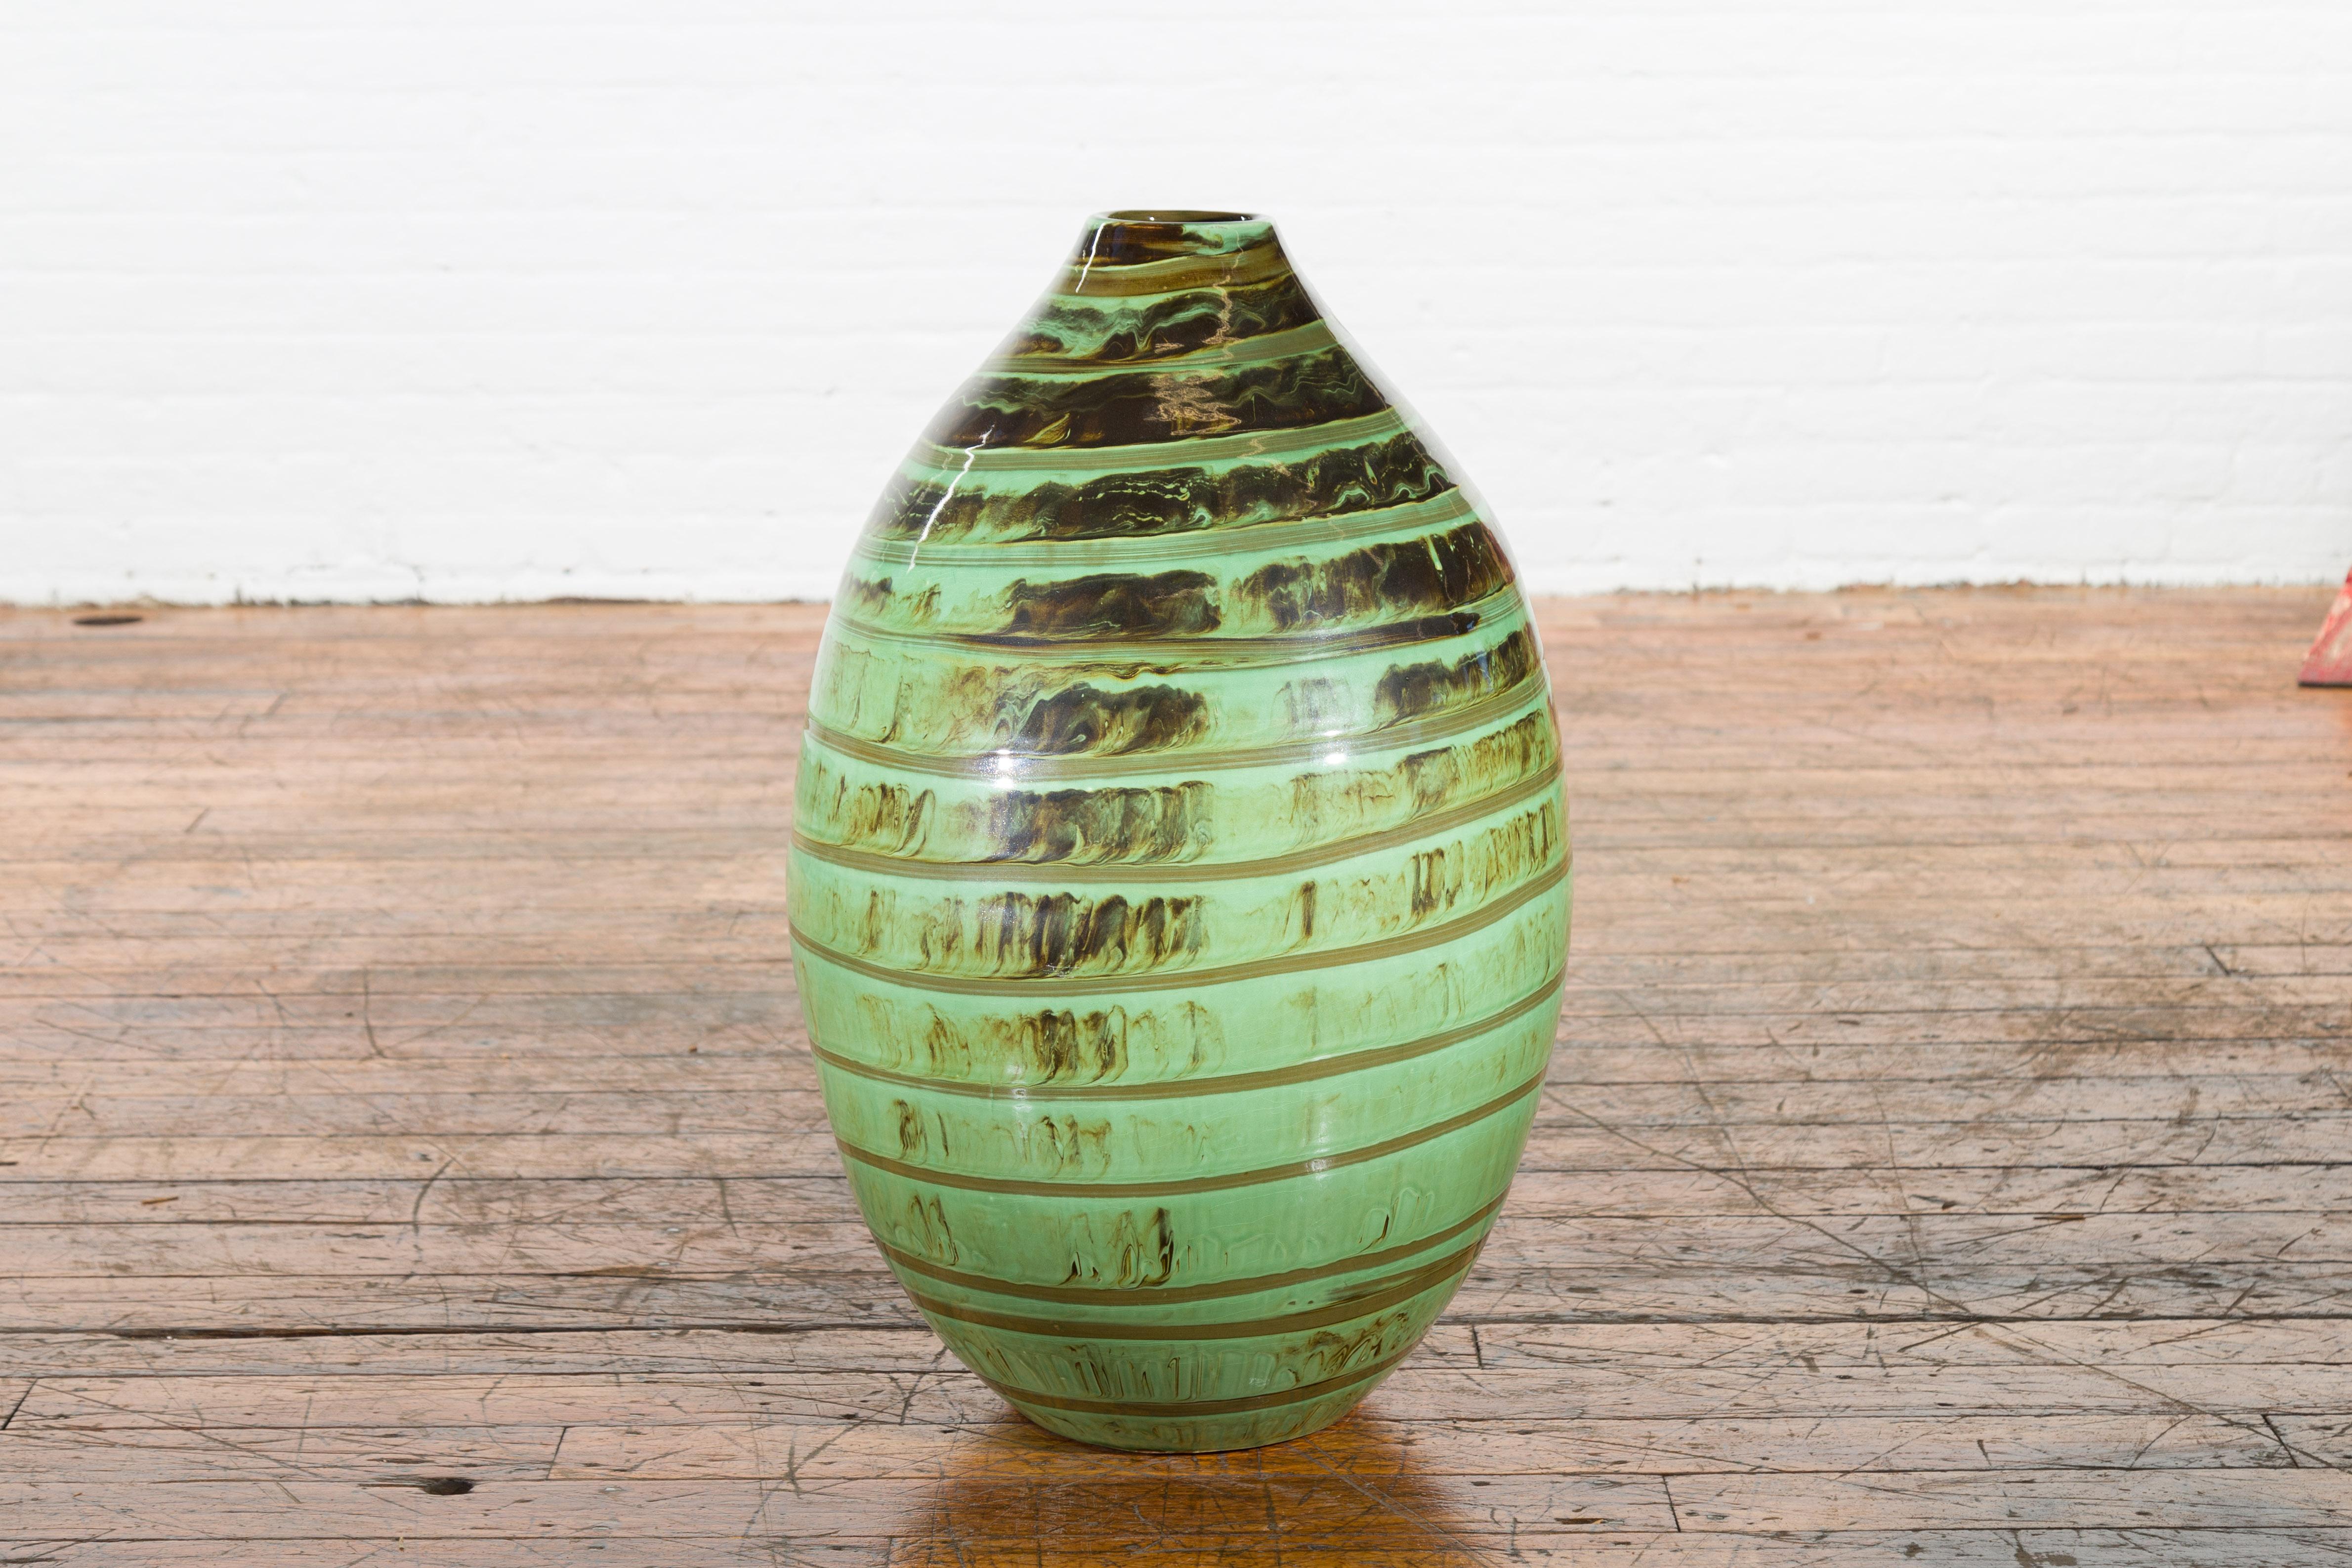 Artisan Contemporary Green and Brown Glaze Ceramic Vase with Spiral Decor For Sale 3